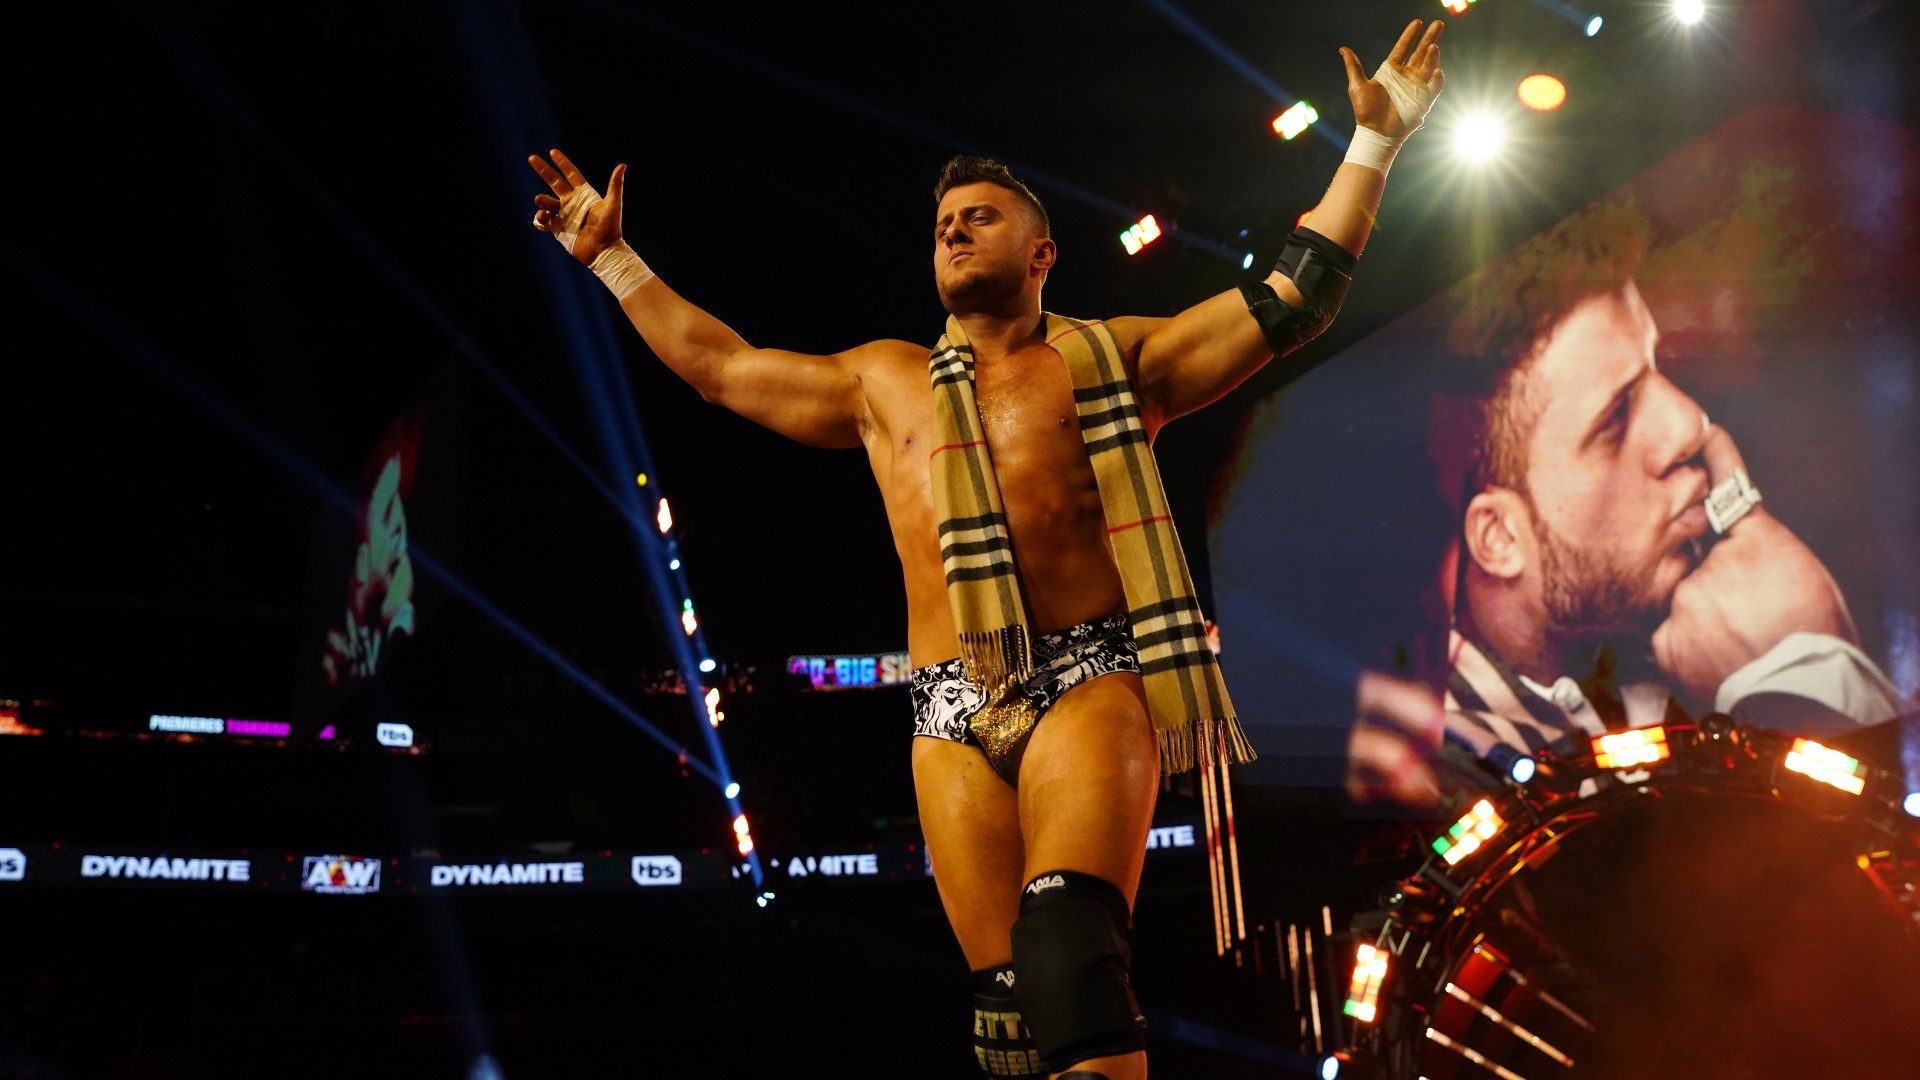 MJF sounds off on rivalry with CM Punk, learning from The Pinnacle, and his place in AEW